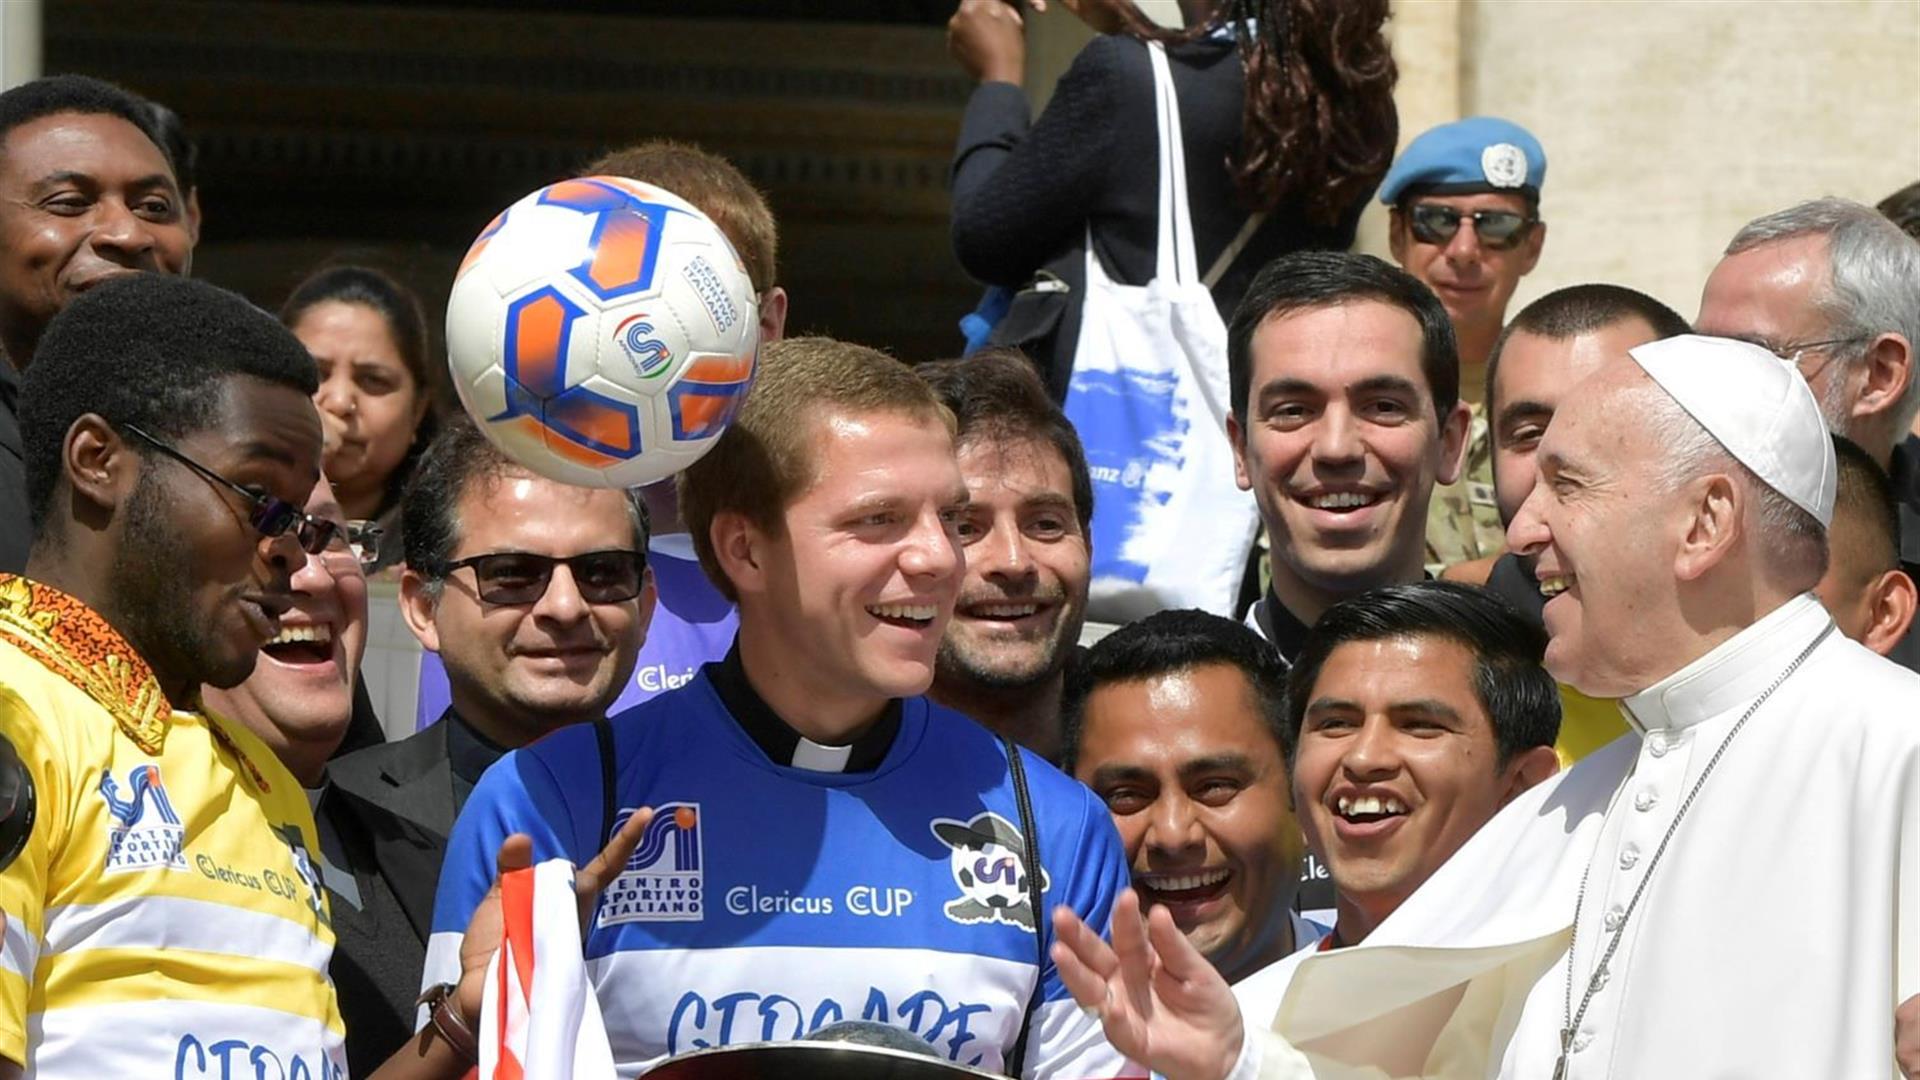 Pope Francis Clericus Cup